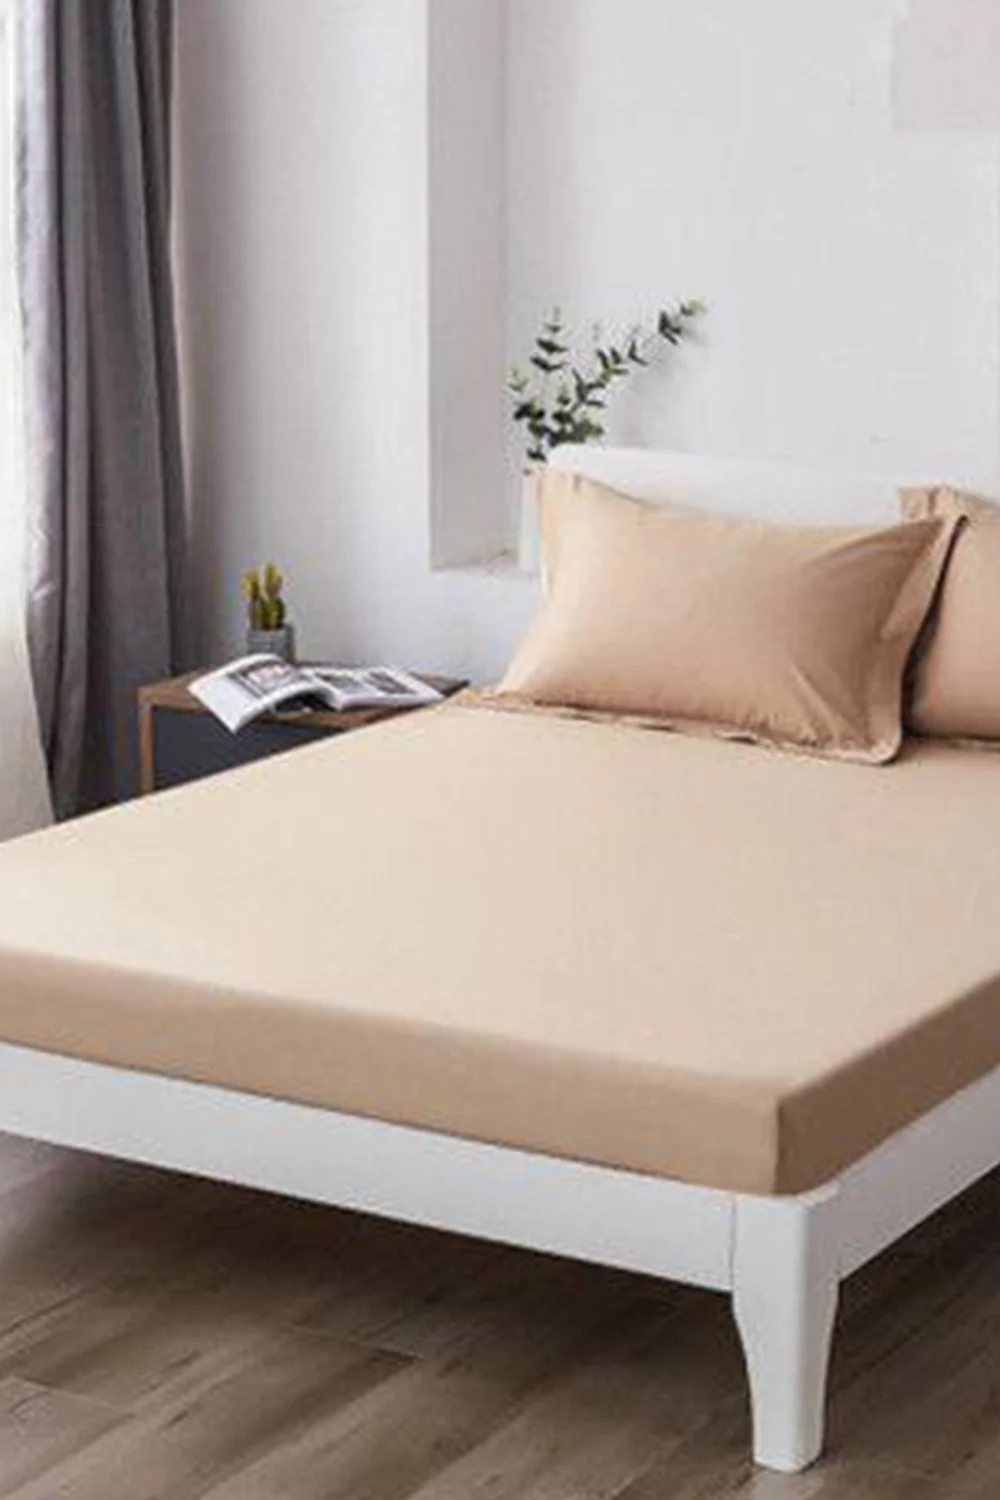 FITTED SHEET DH - BEIGE